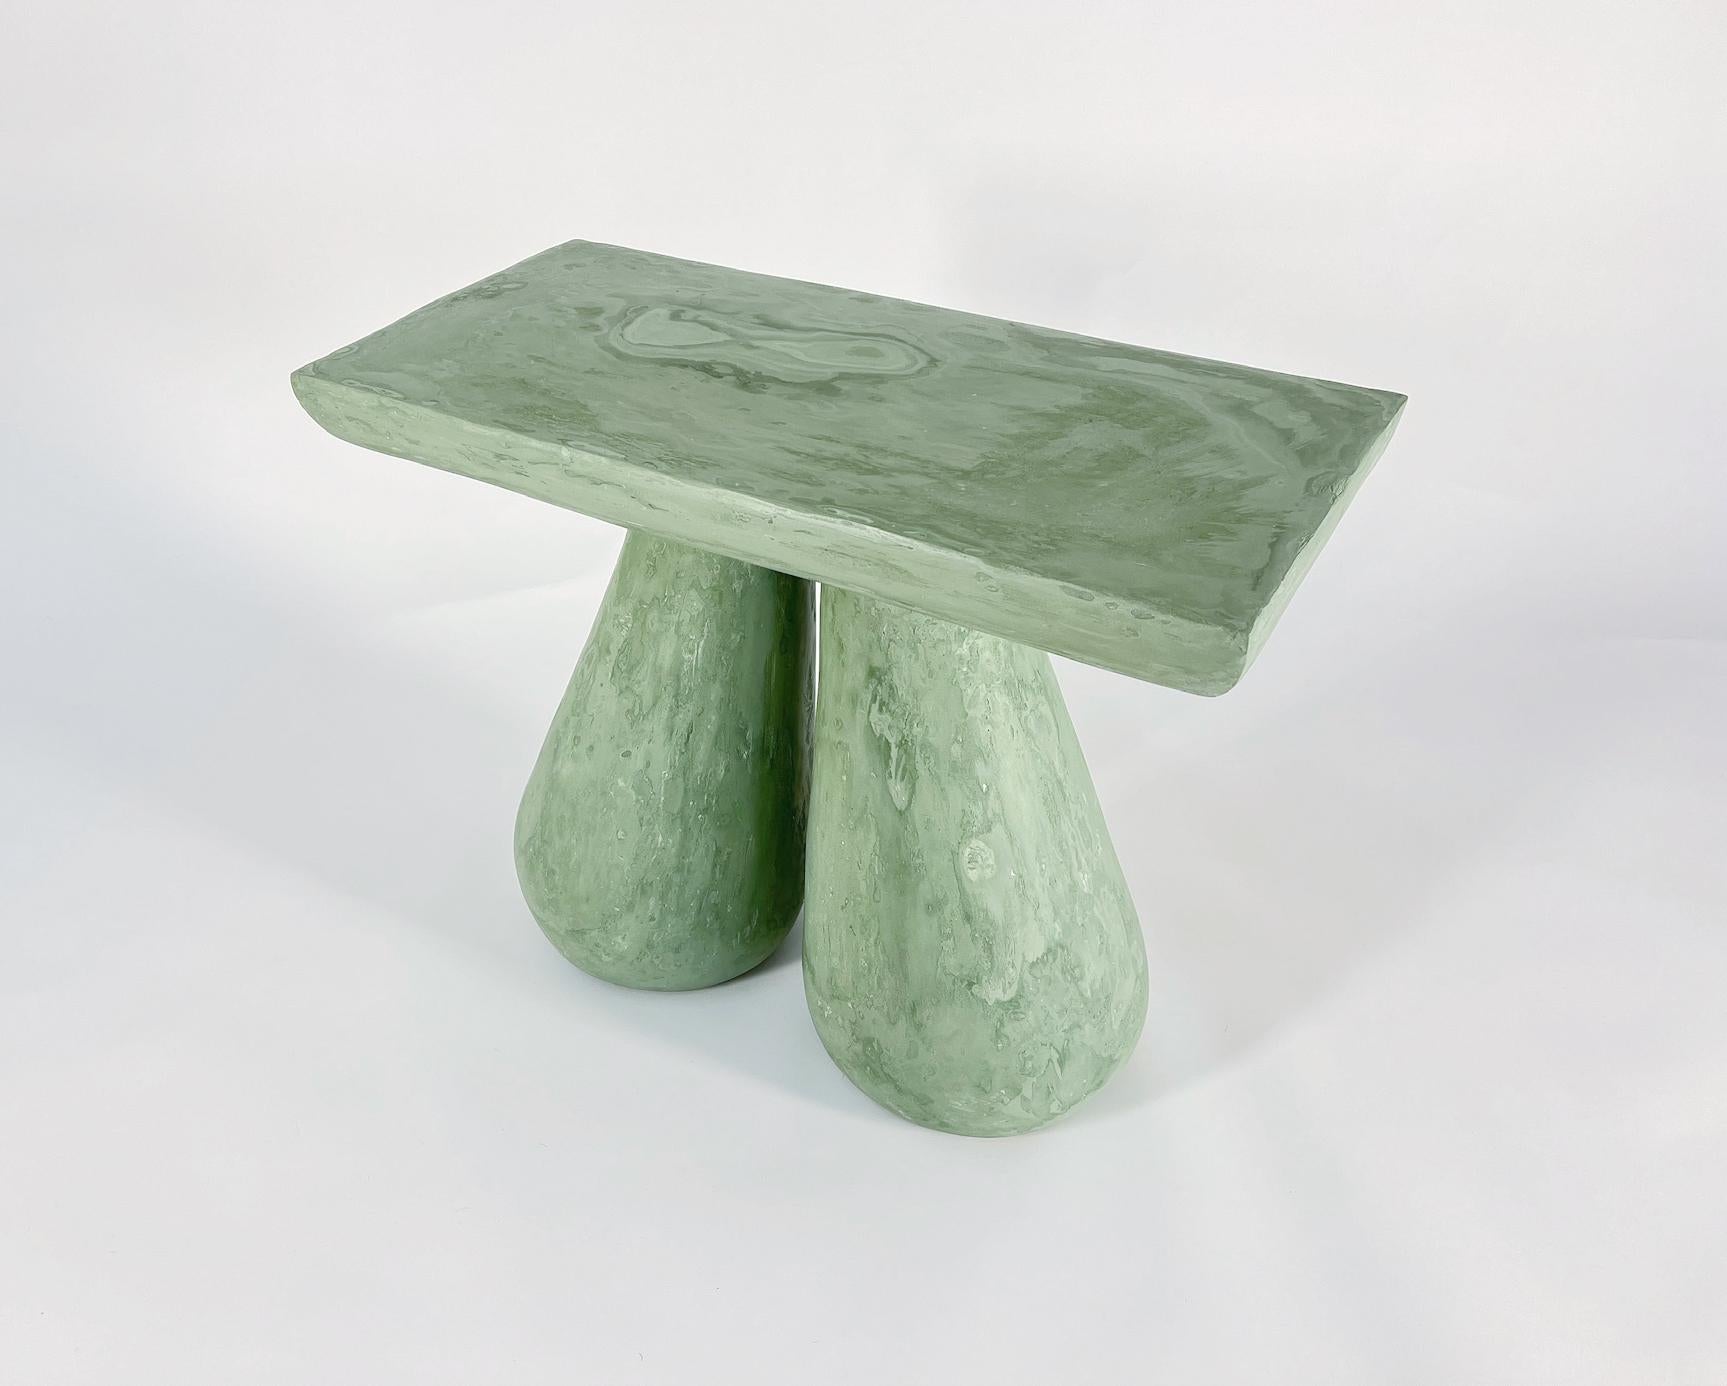 Hand-Crafted Erika Mini Table - Modern Hand Crafted Plaster Table by Artist Gabriel Anderson